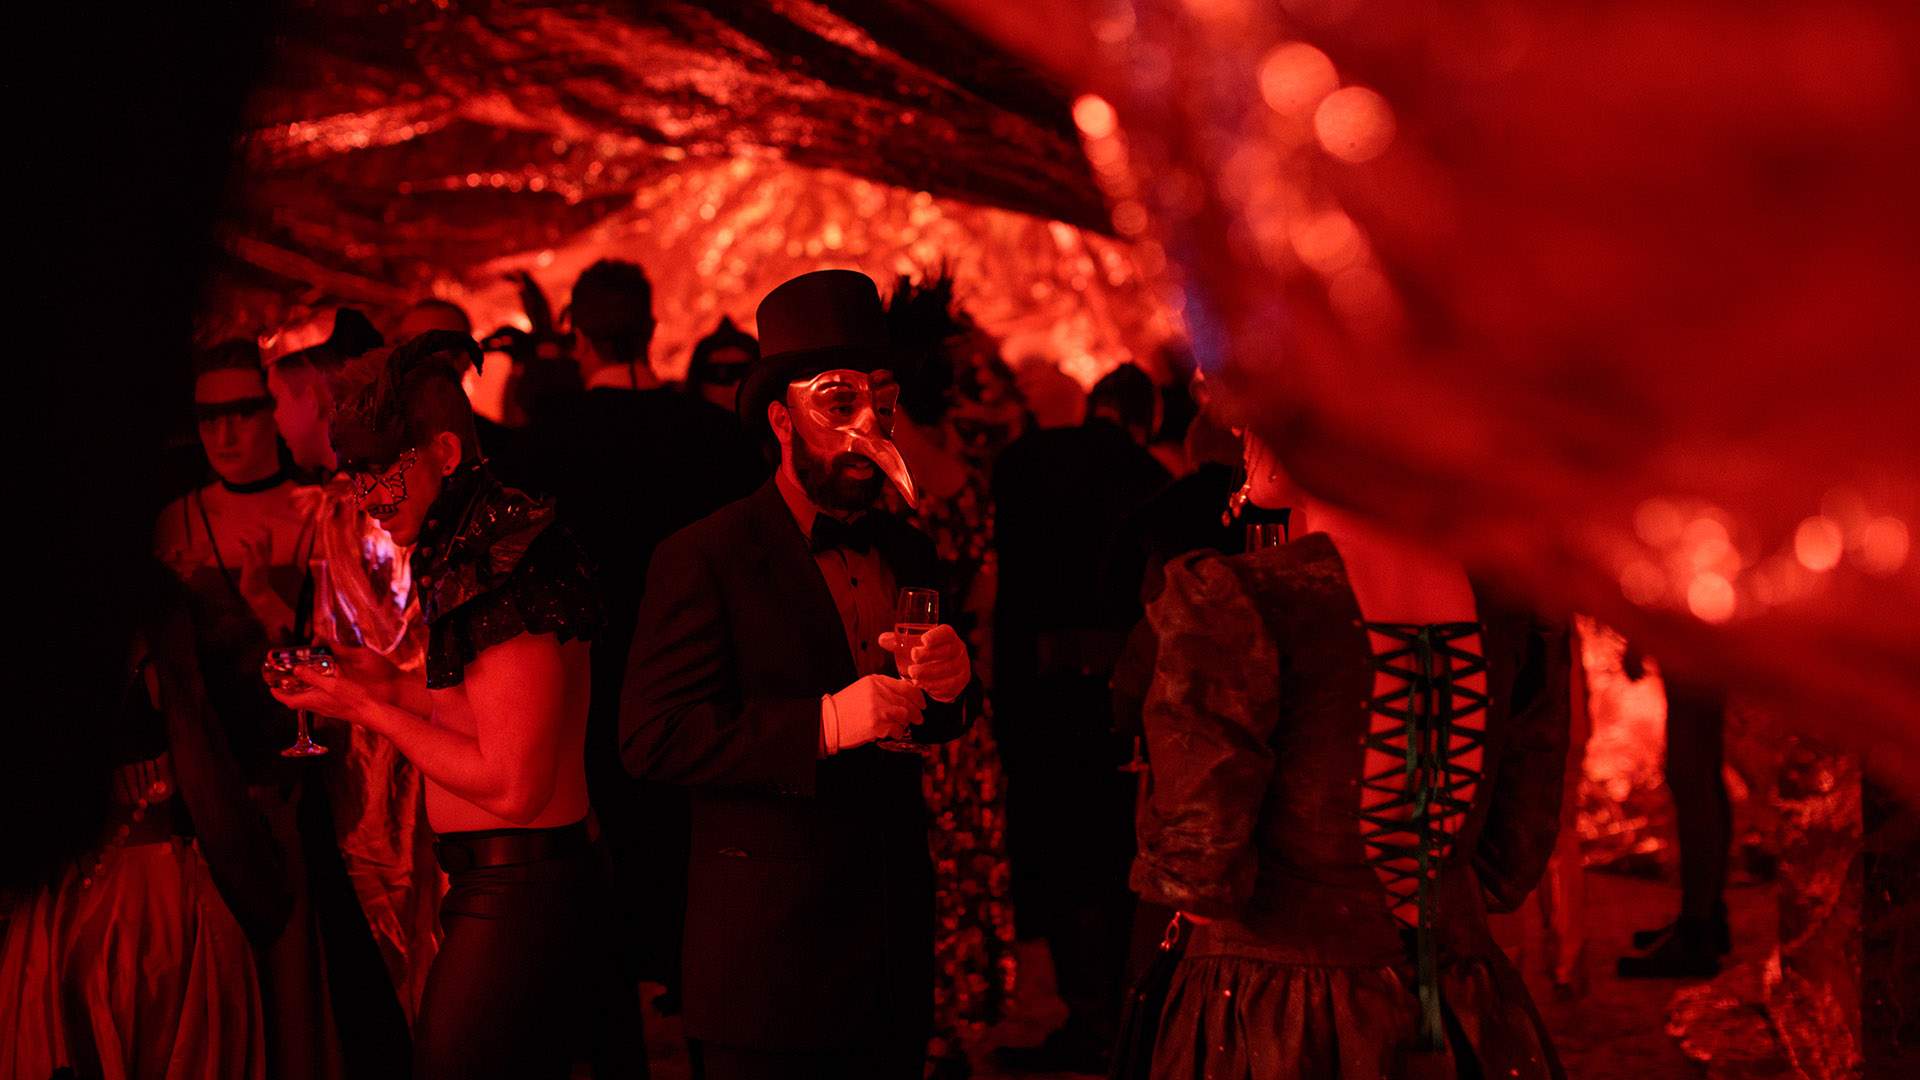 From Wholesome to Hedonistic: A Guide to Dark Mofo 2023 According to the Level of Chaos You're After